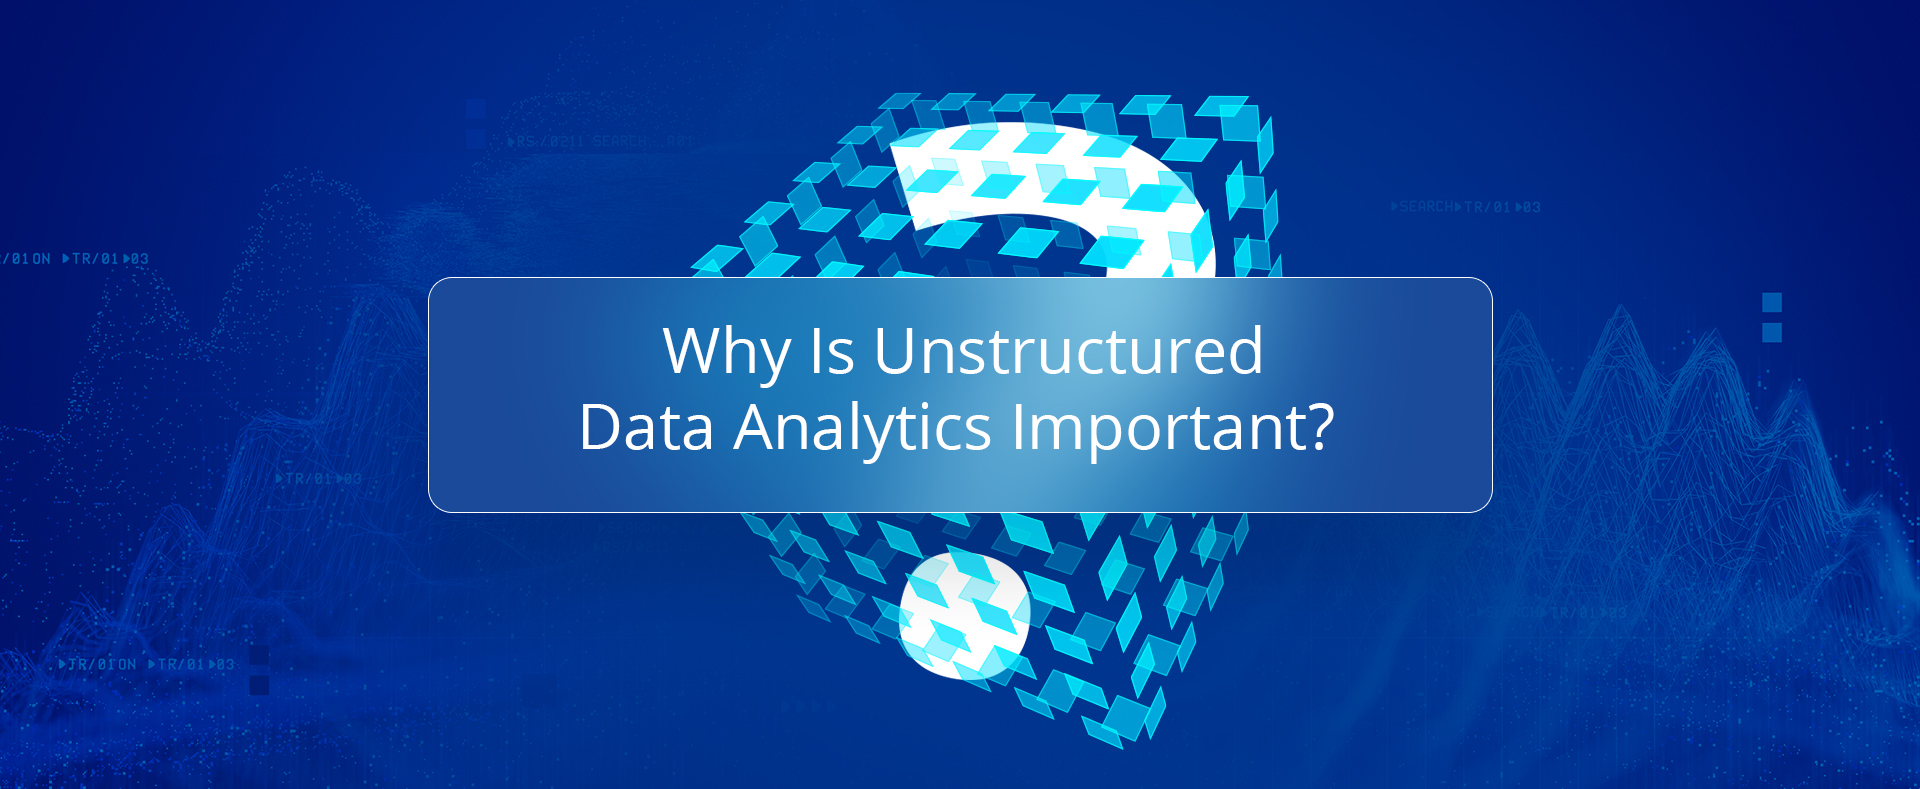 why is unstructured data analytics important